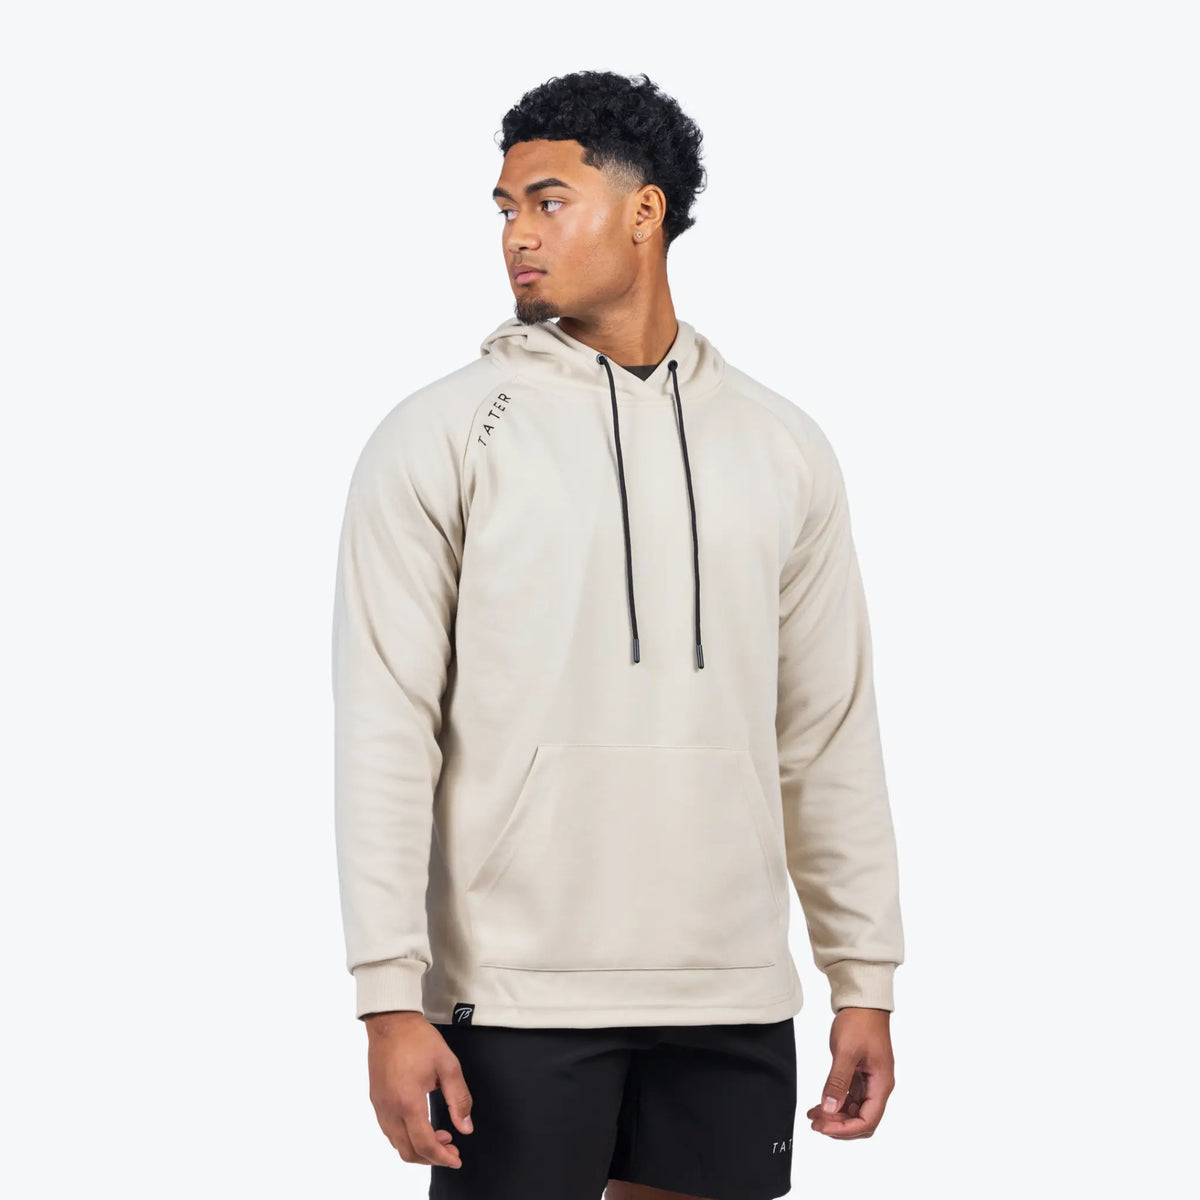 The image features a model in a cream hoodie and black shorts by TATER, suitable for sports or casual wear. The design is minimalist and modern.